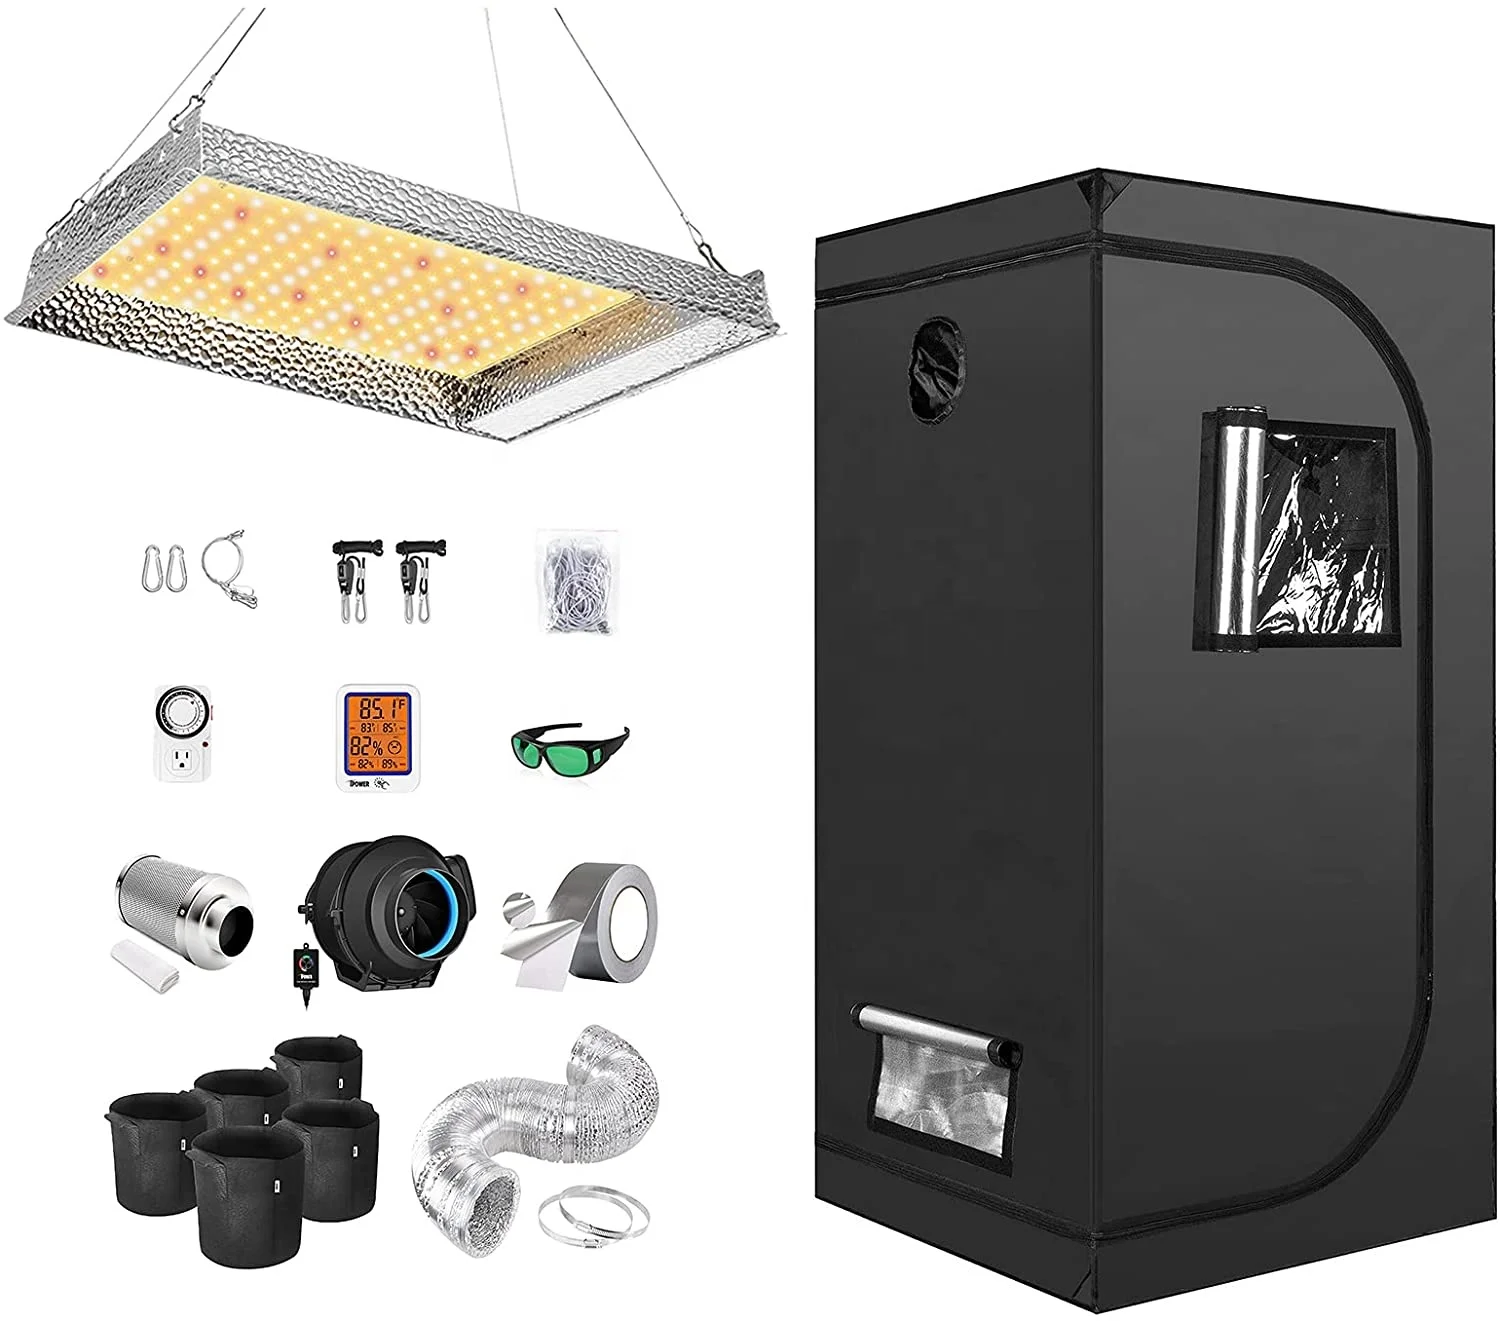 

Led new grow tent Aluminum Size 60*60*140cm 24"x24" indoor plant and vegs growing tent, Black